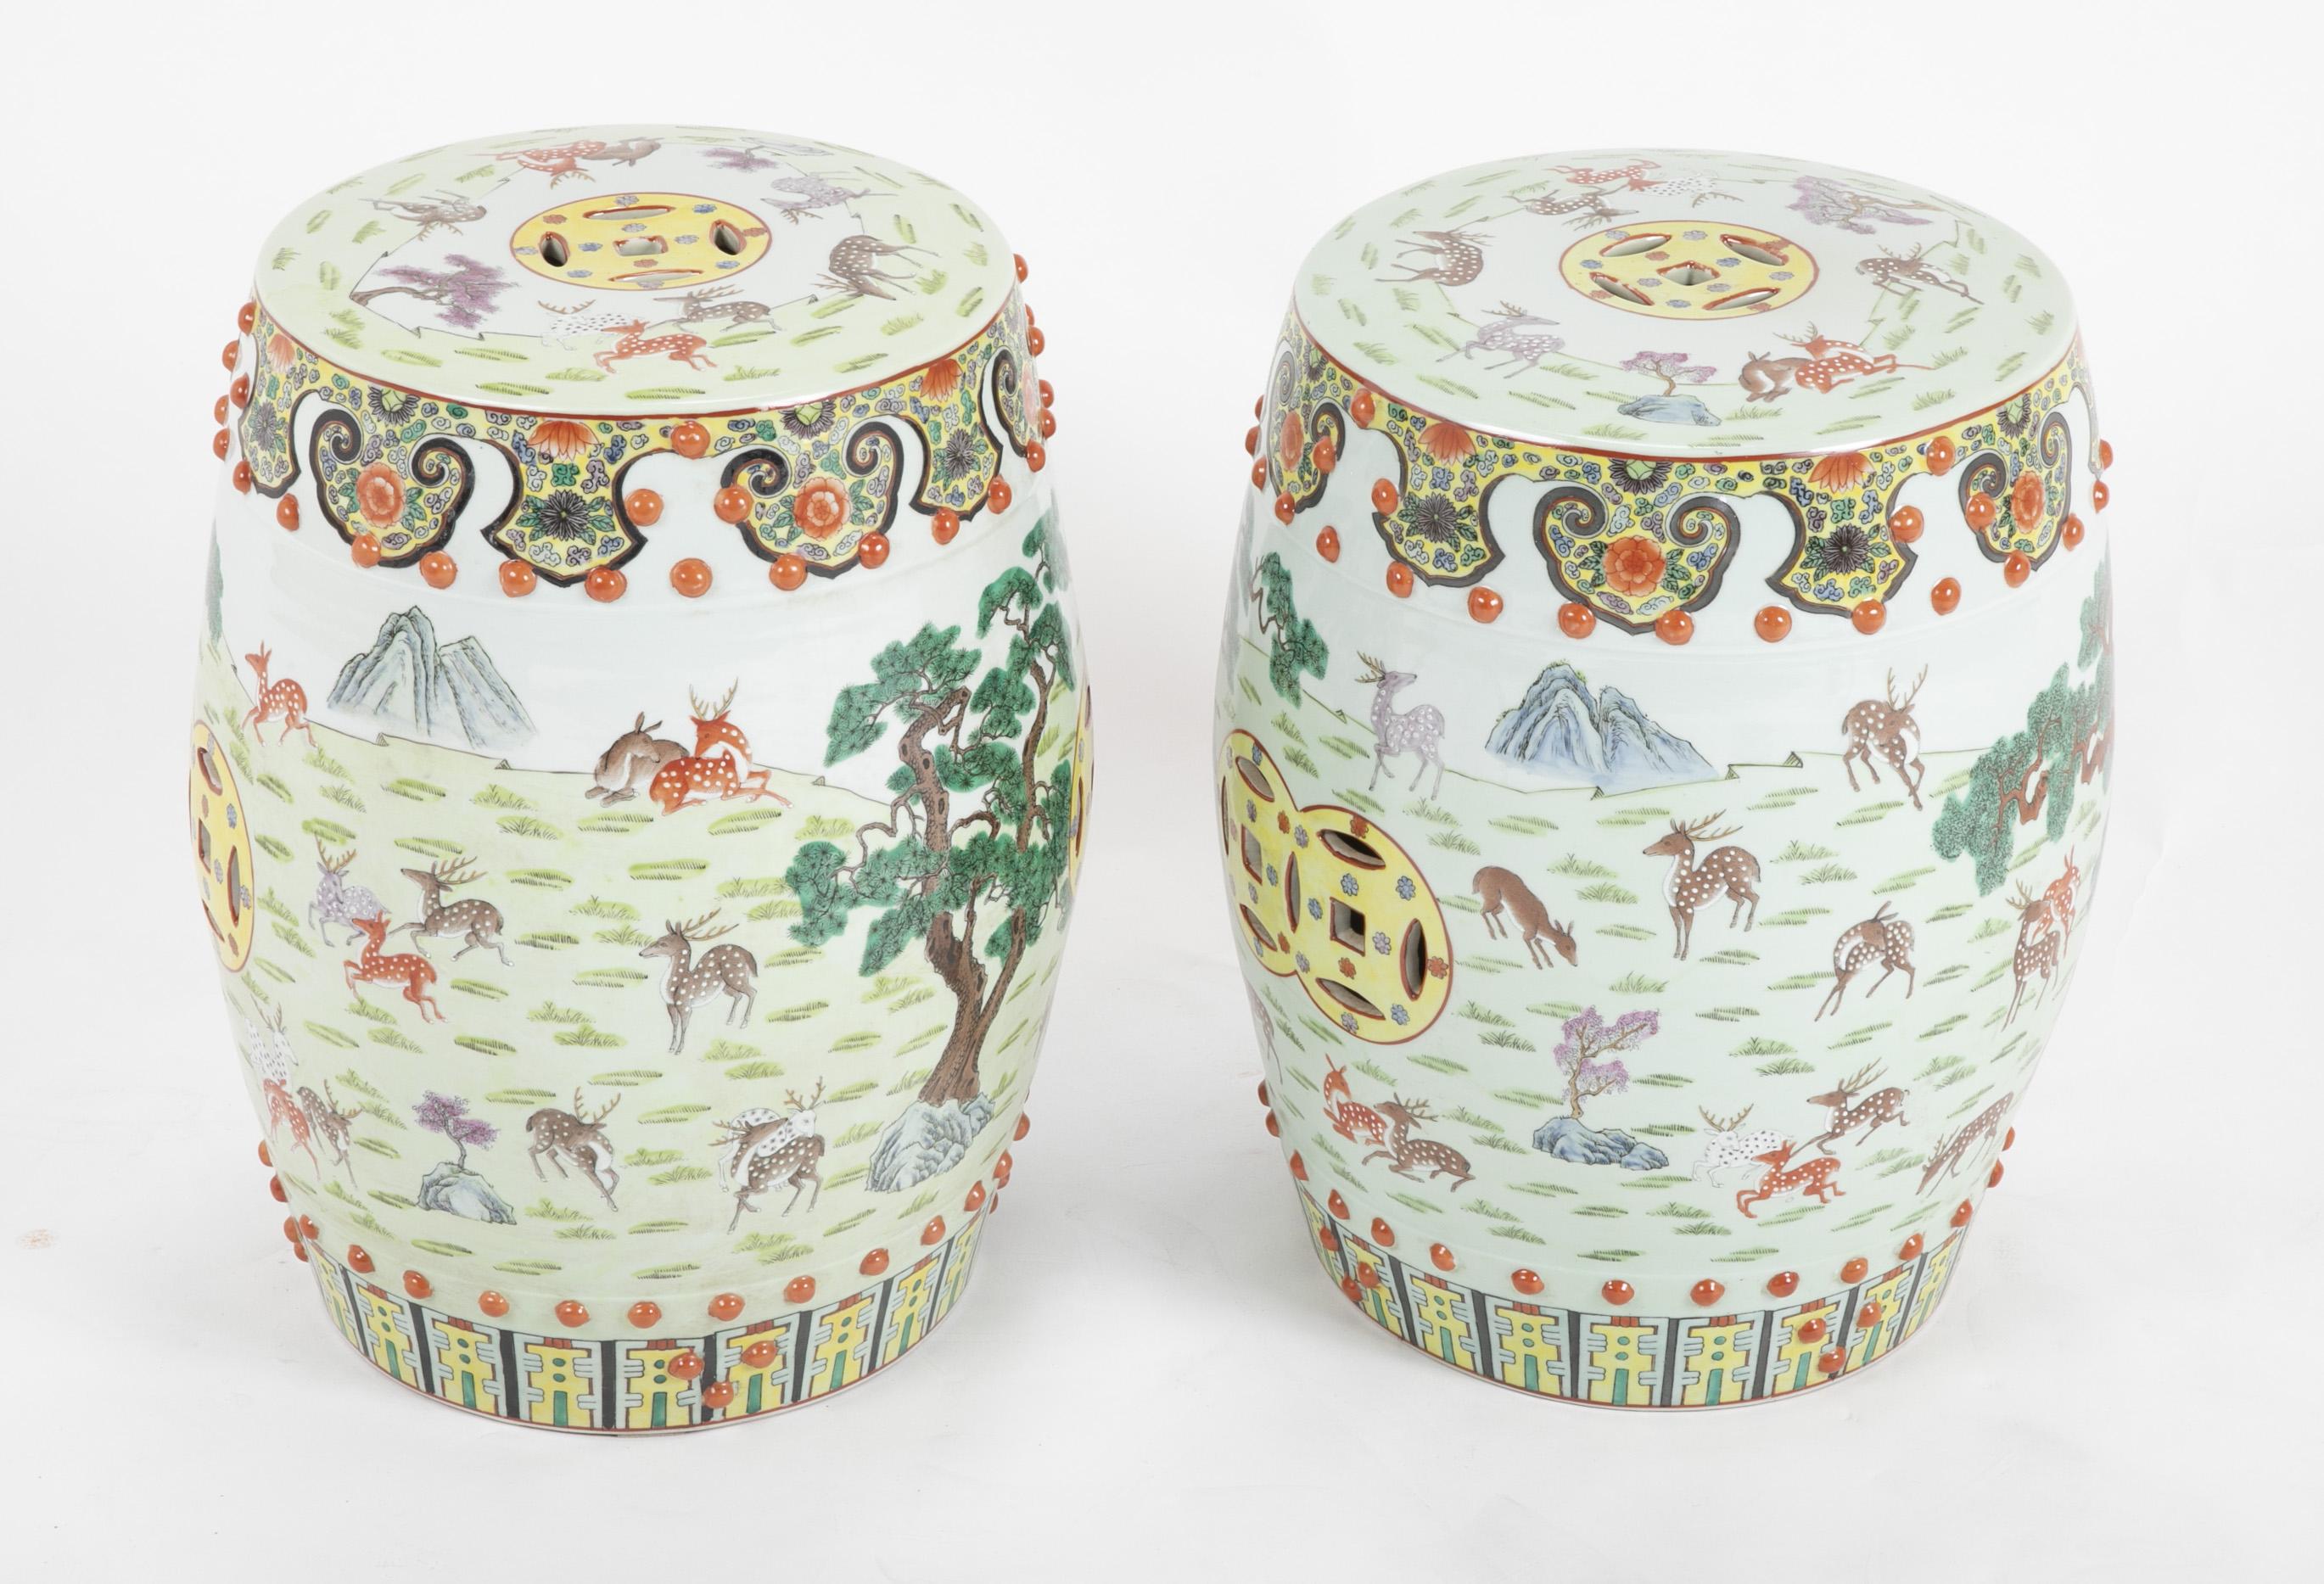 Chinese Export Pair of 19th Century Chinese Famille Rose Porcelain Garden Seat